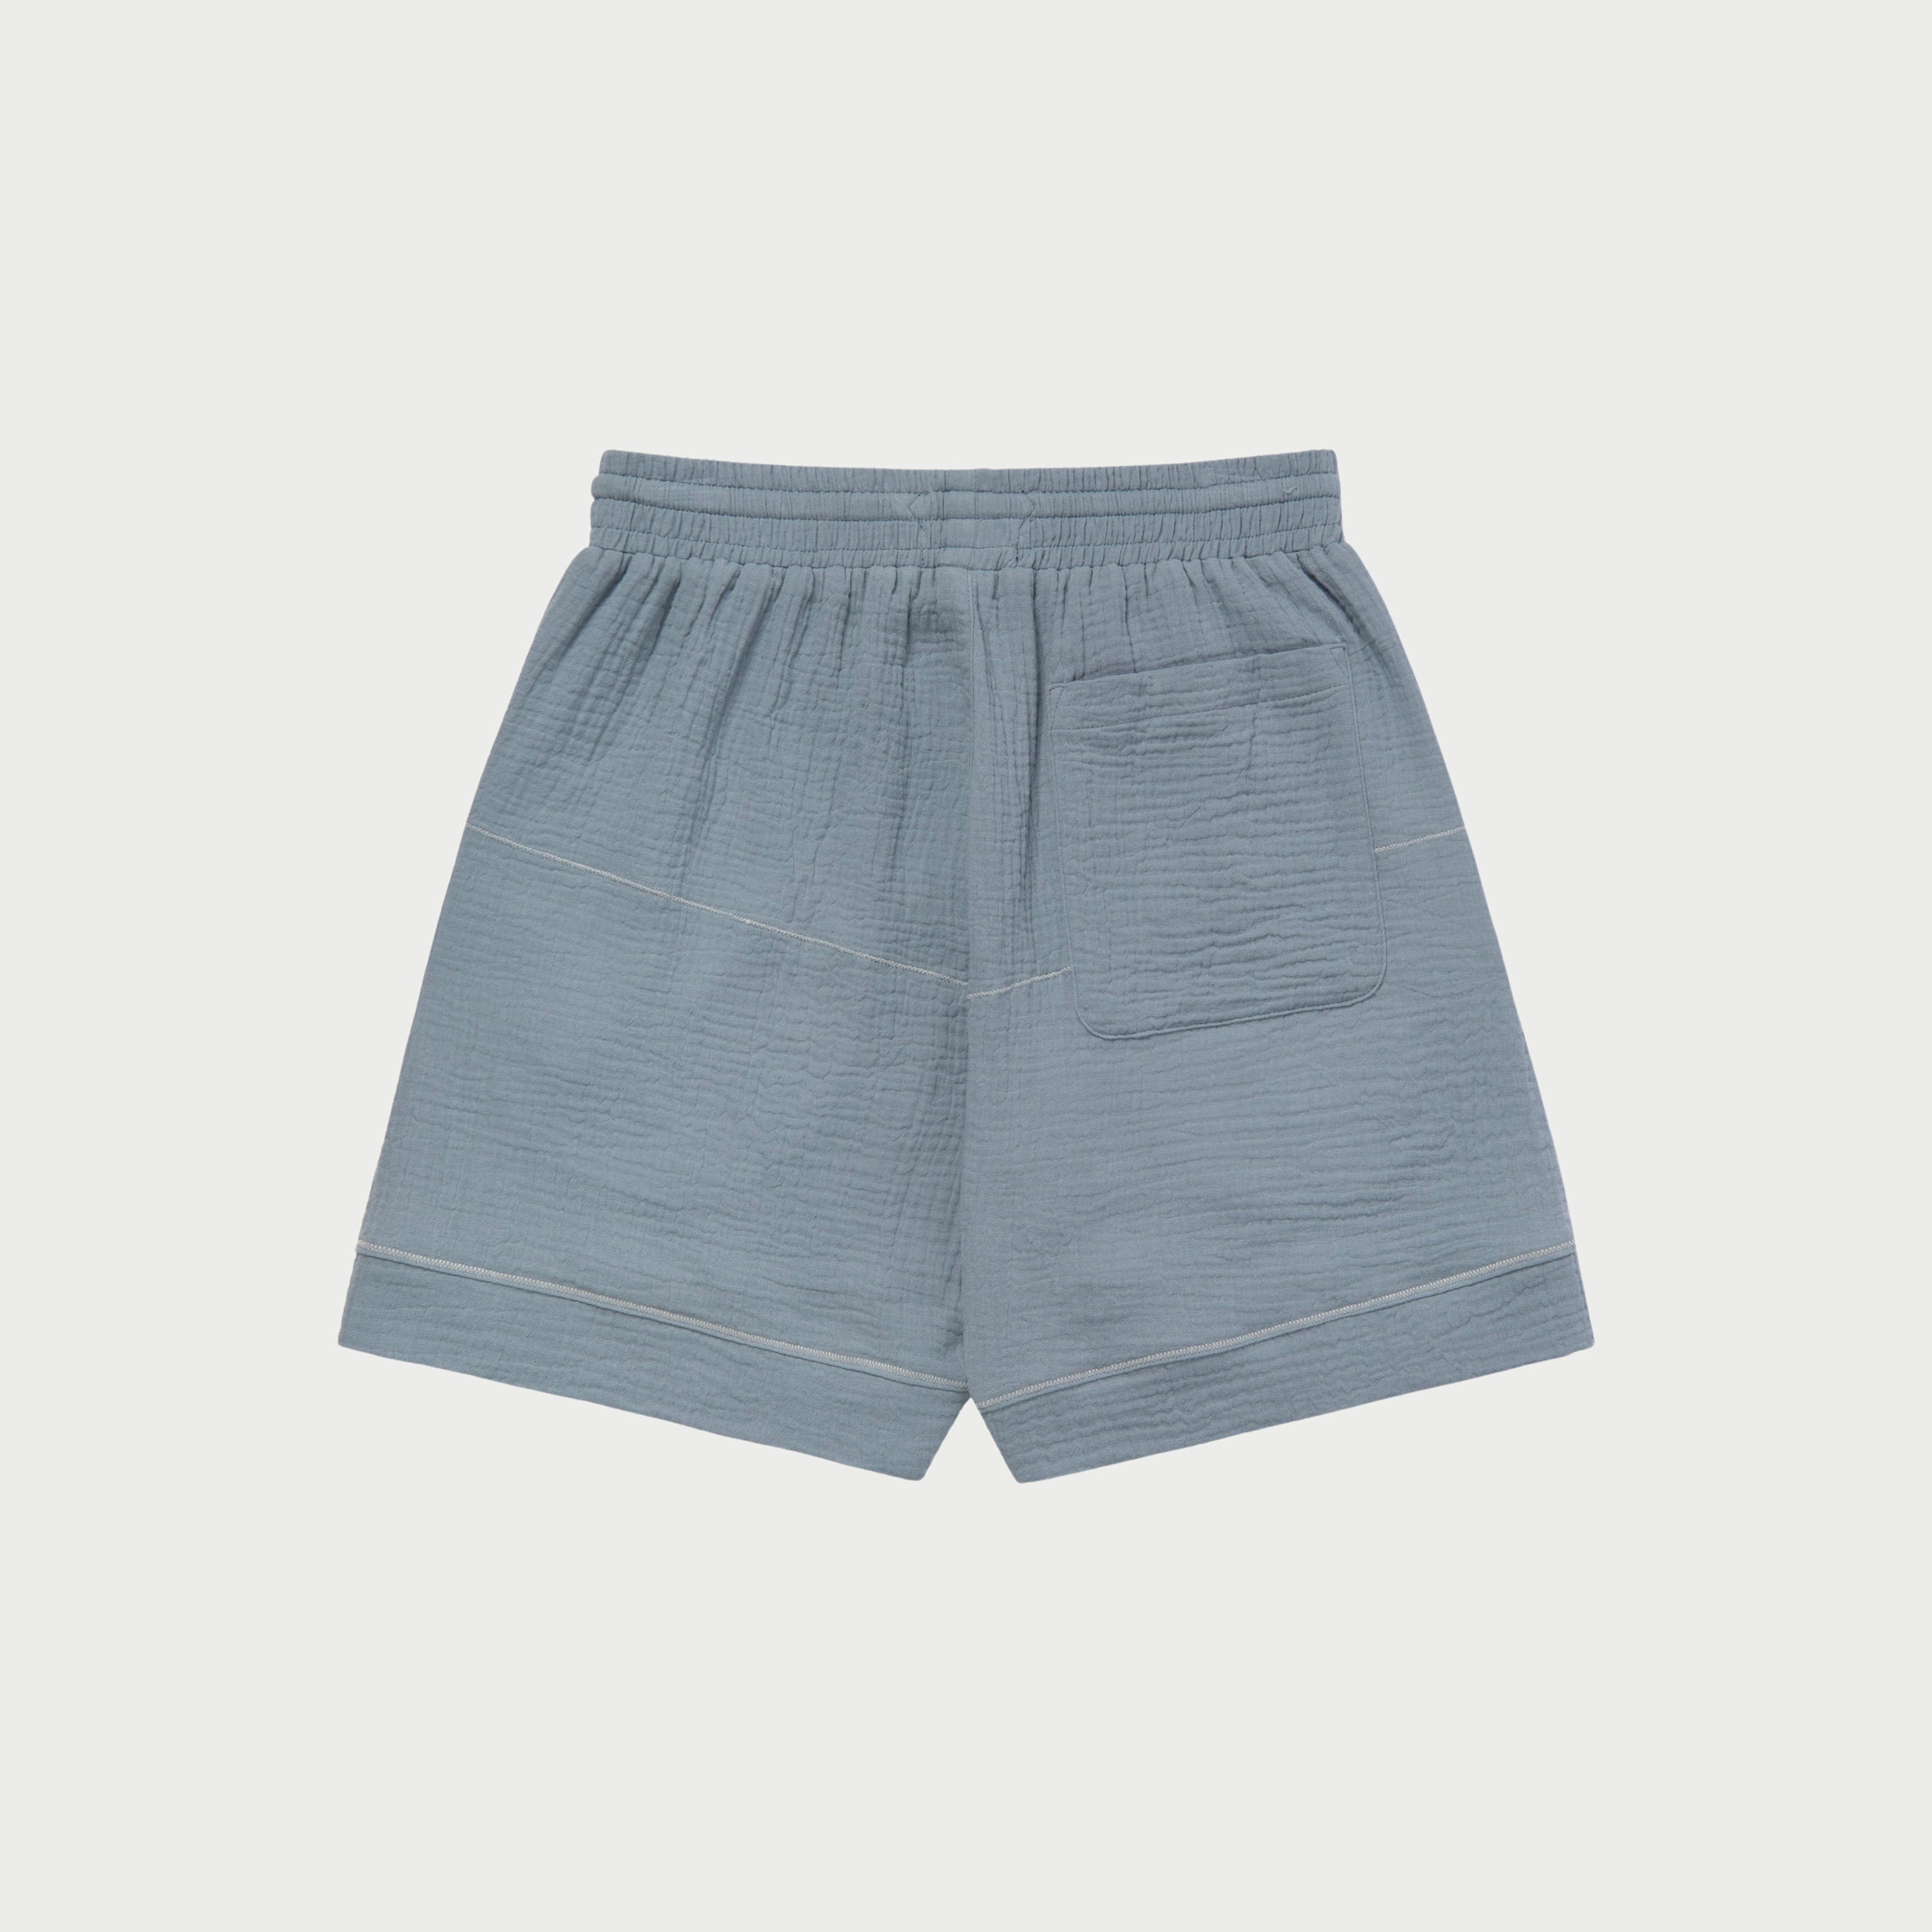 Embroidered Vacation Shorts (Pacific Blue)